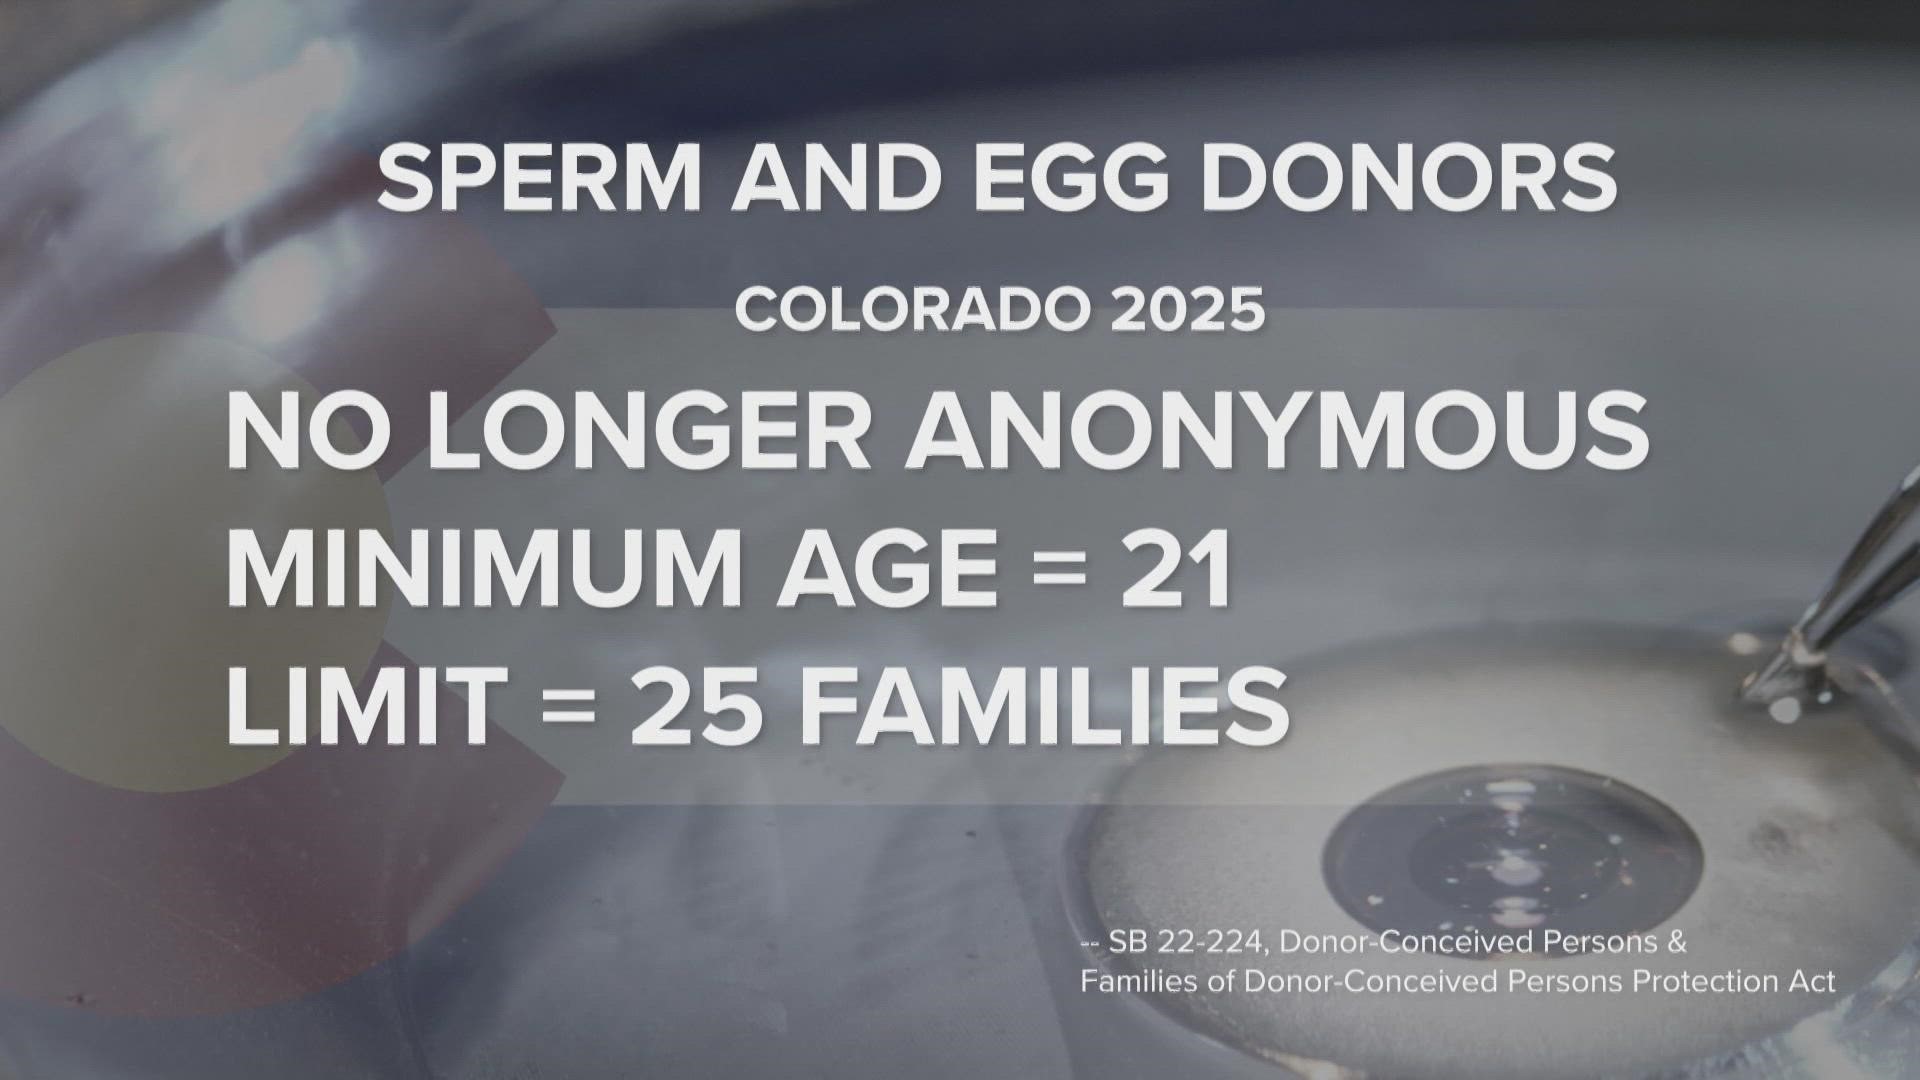 Colorado is the first state to end anonymous sperm and egg donations. The new law will rollout between 2023 and 2025.